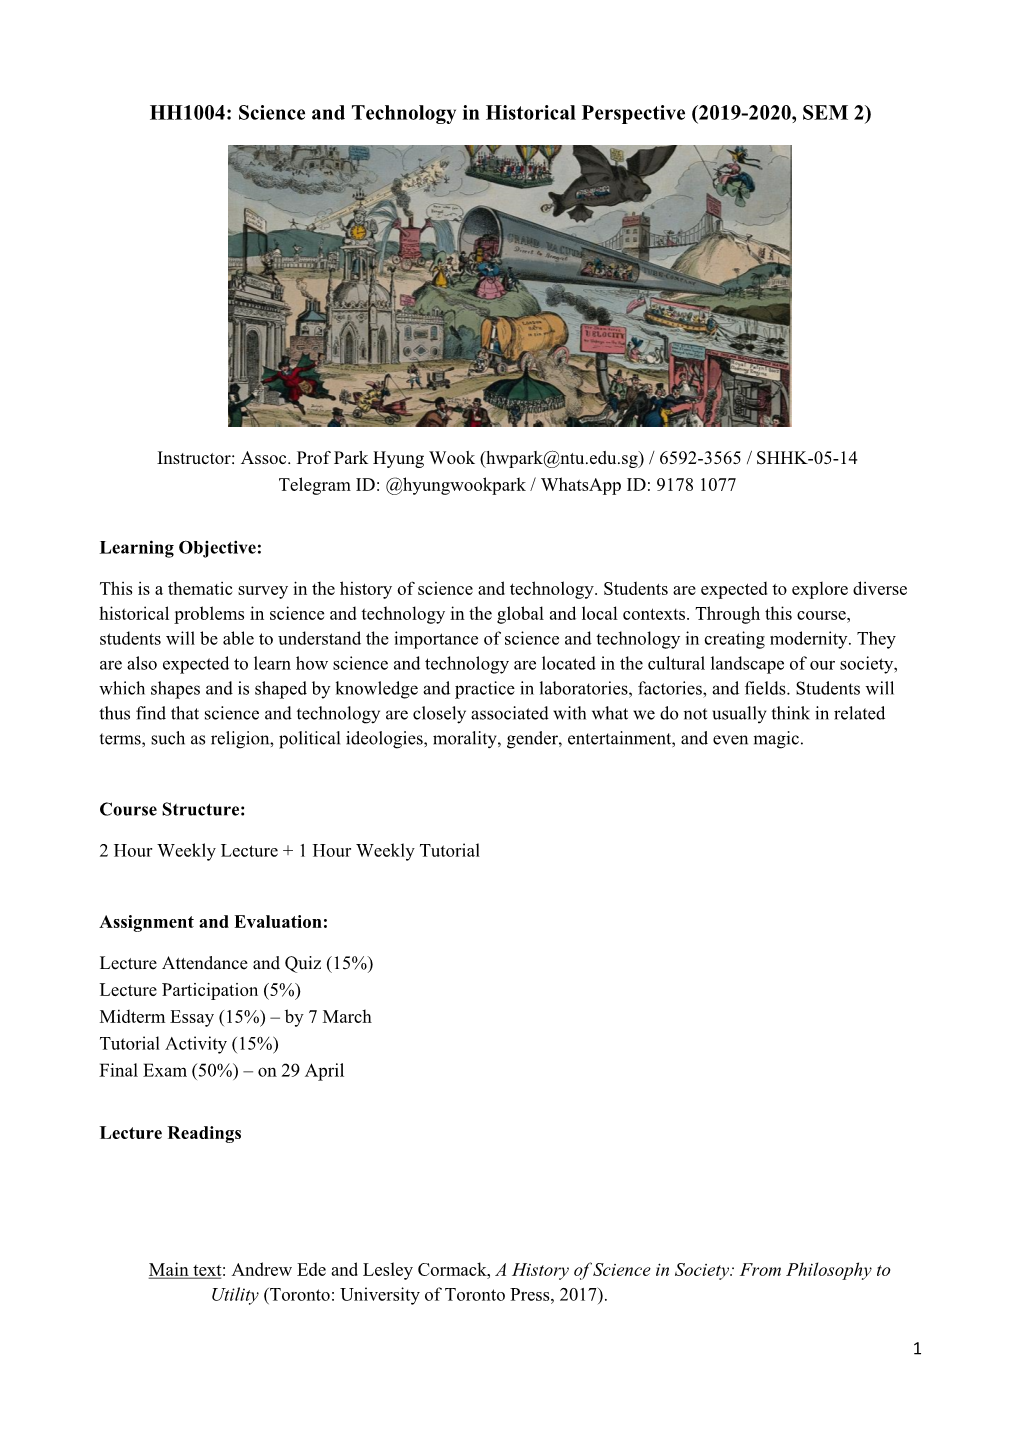 Science and Technology in Historical Perspective (2019-2020, SEM 2)